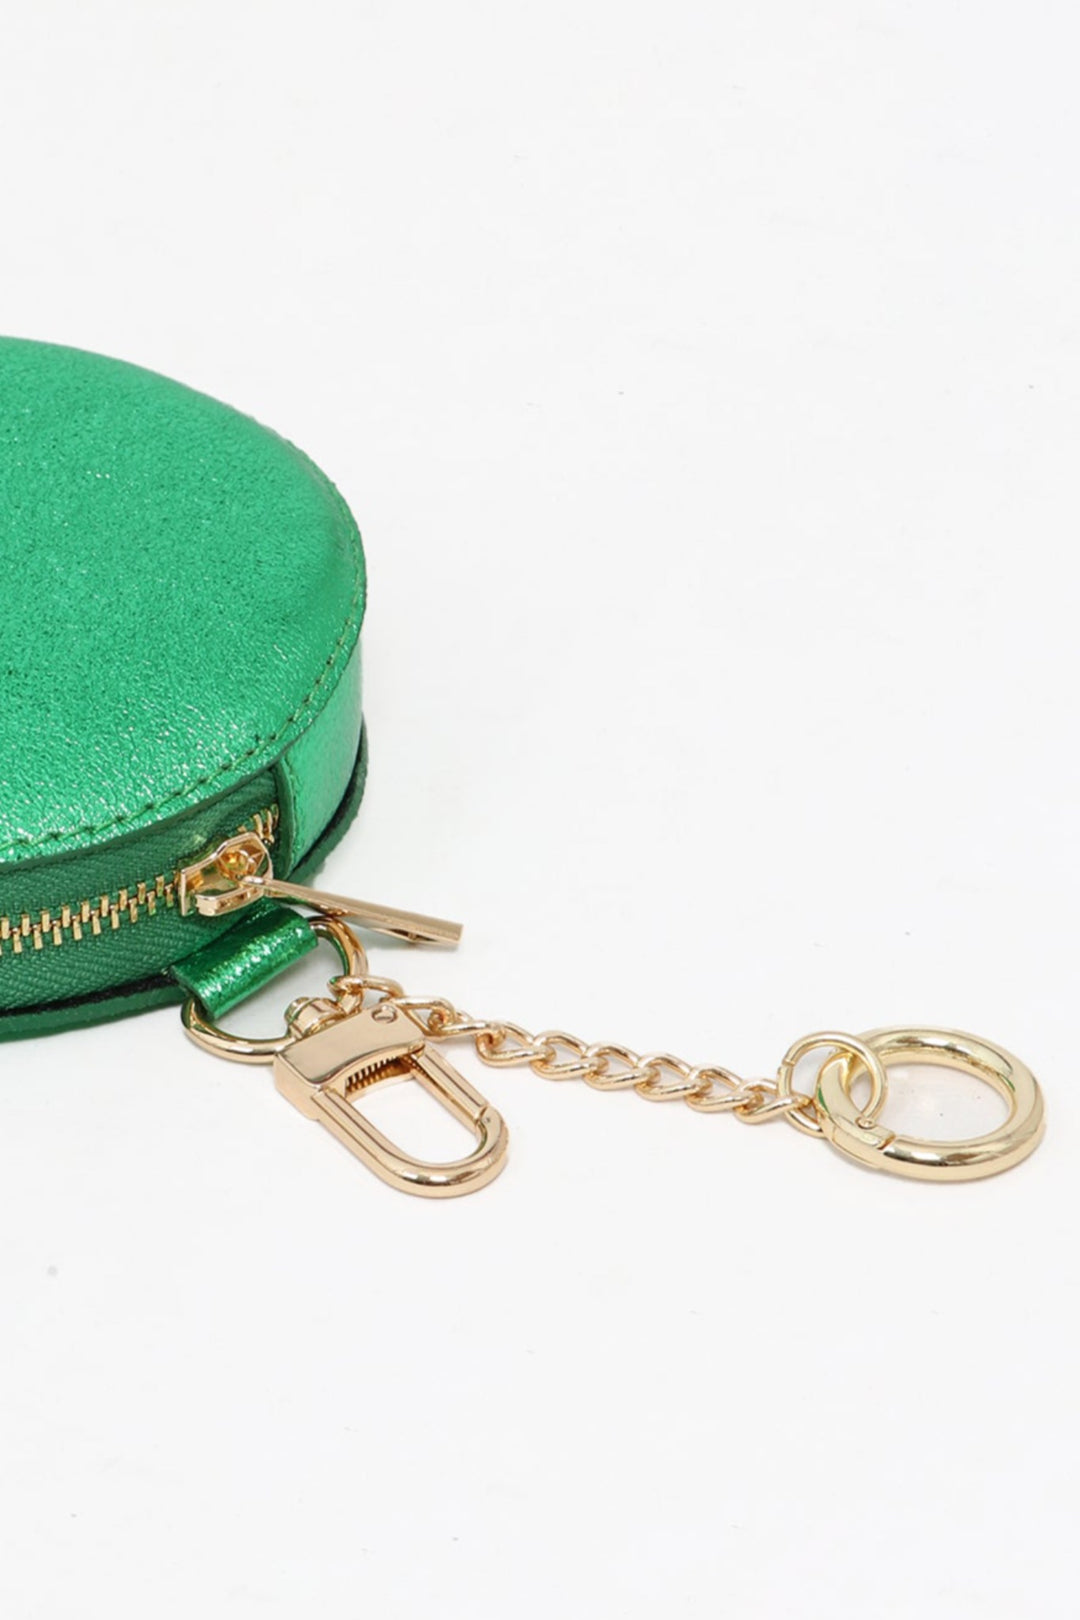 Metallic Bright Green Leather Round Clip-On Coin Purse